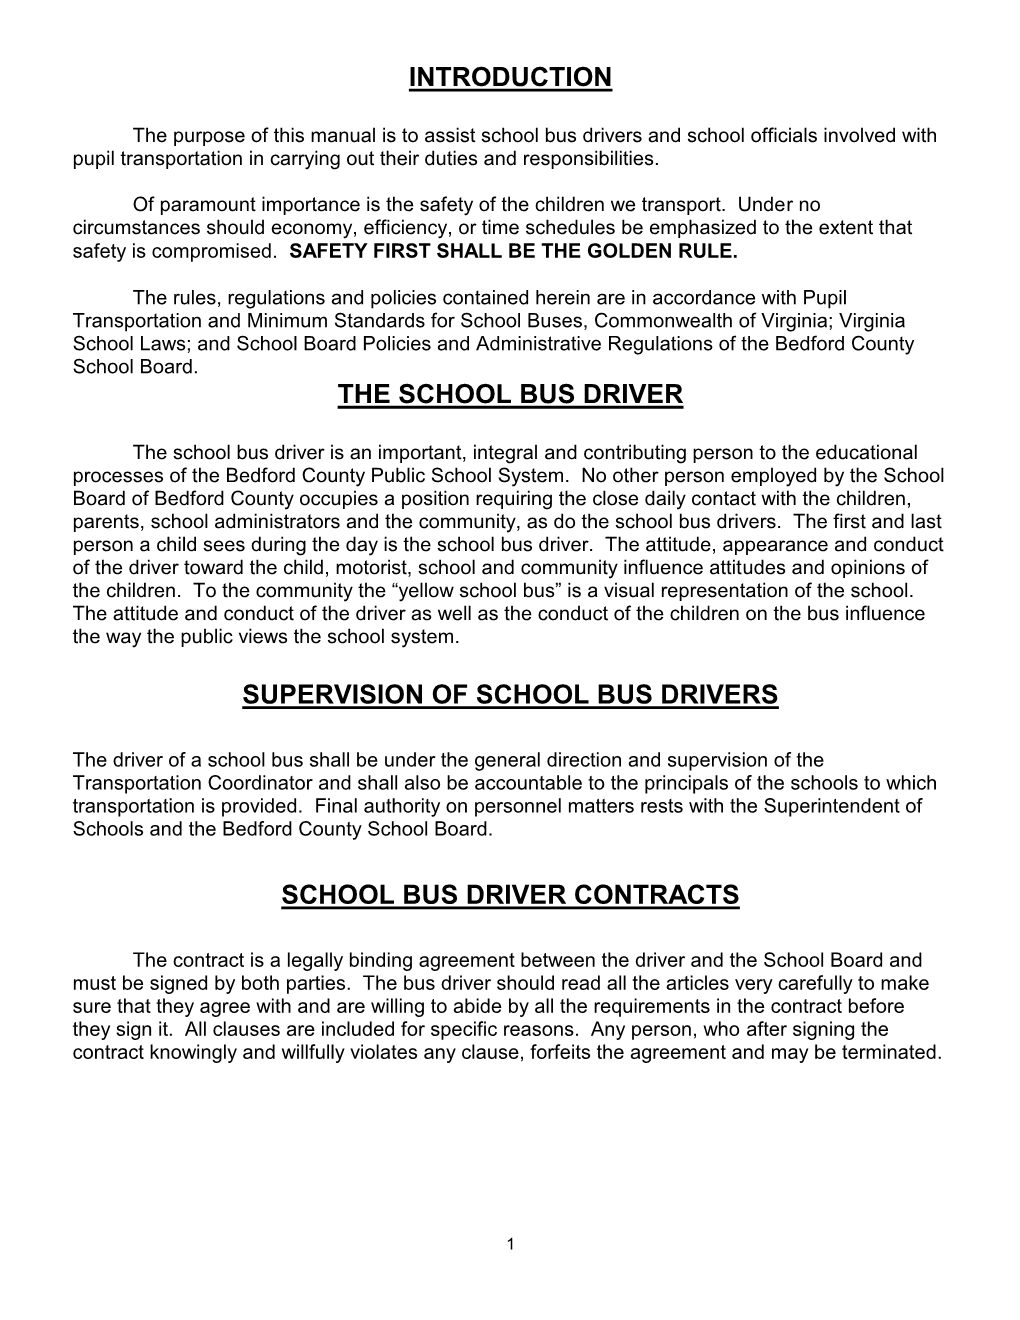 Introduction the School Bus Driver Supervision of School Bus Drivers School Bus Driver Contracts